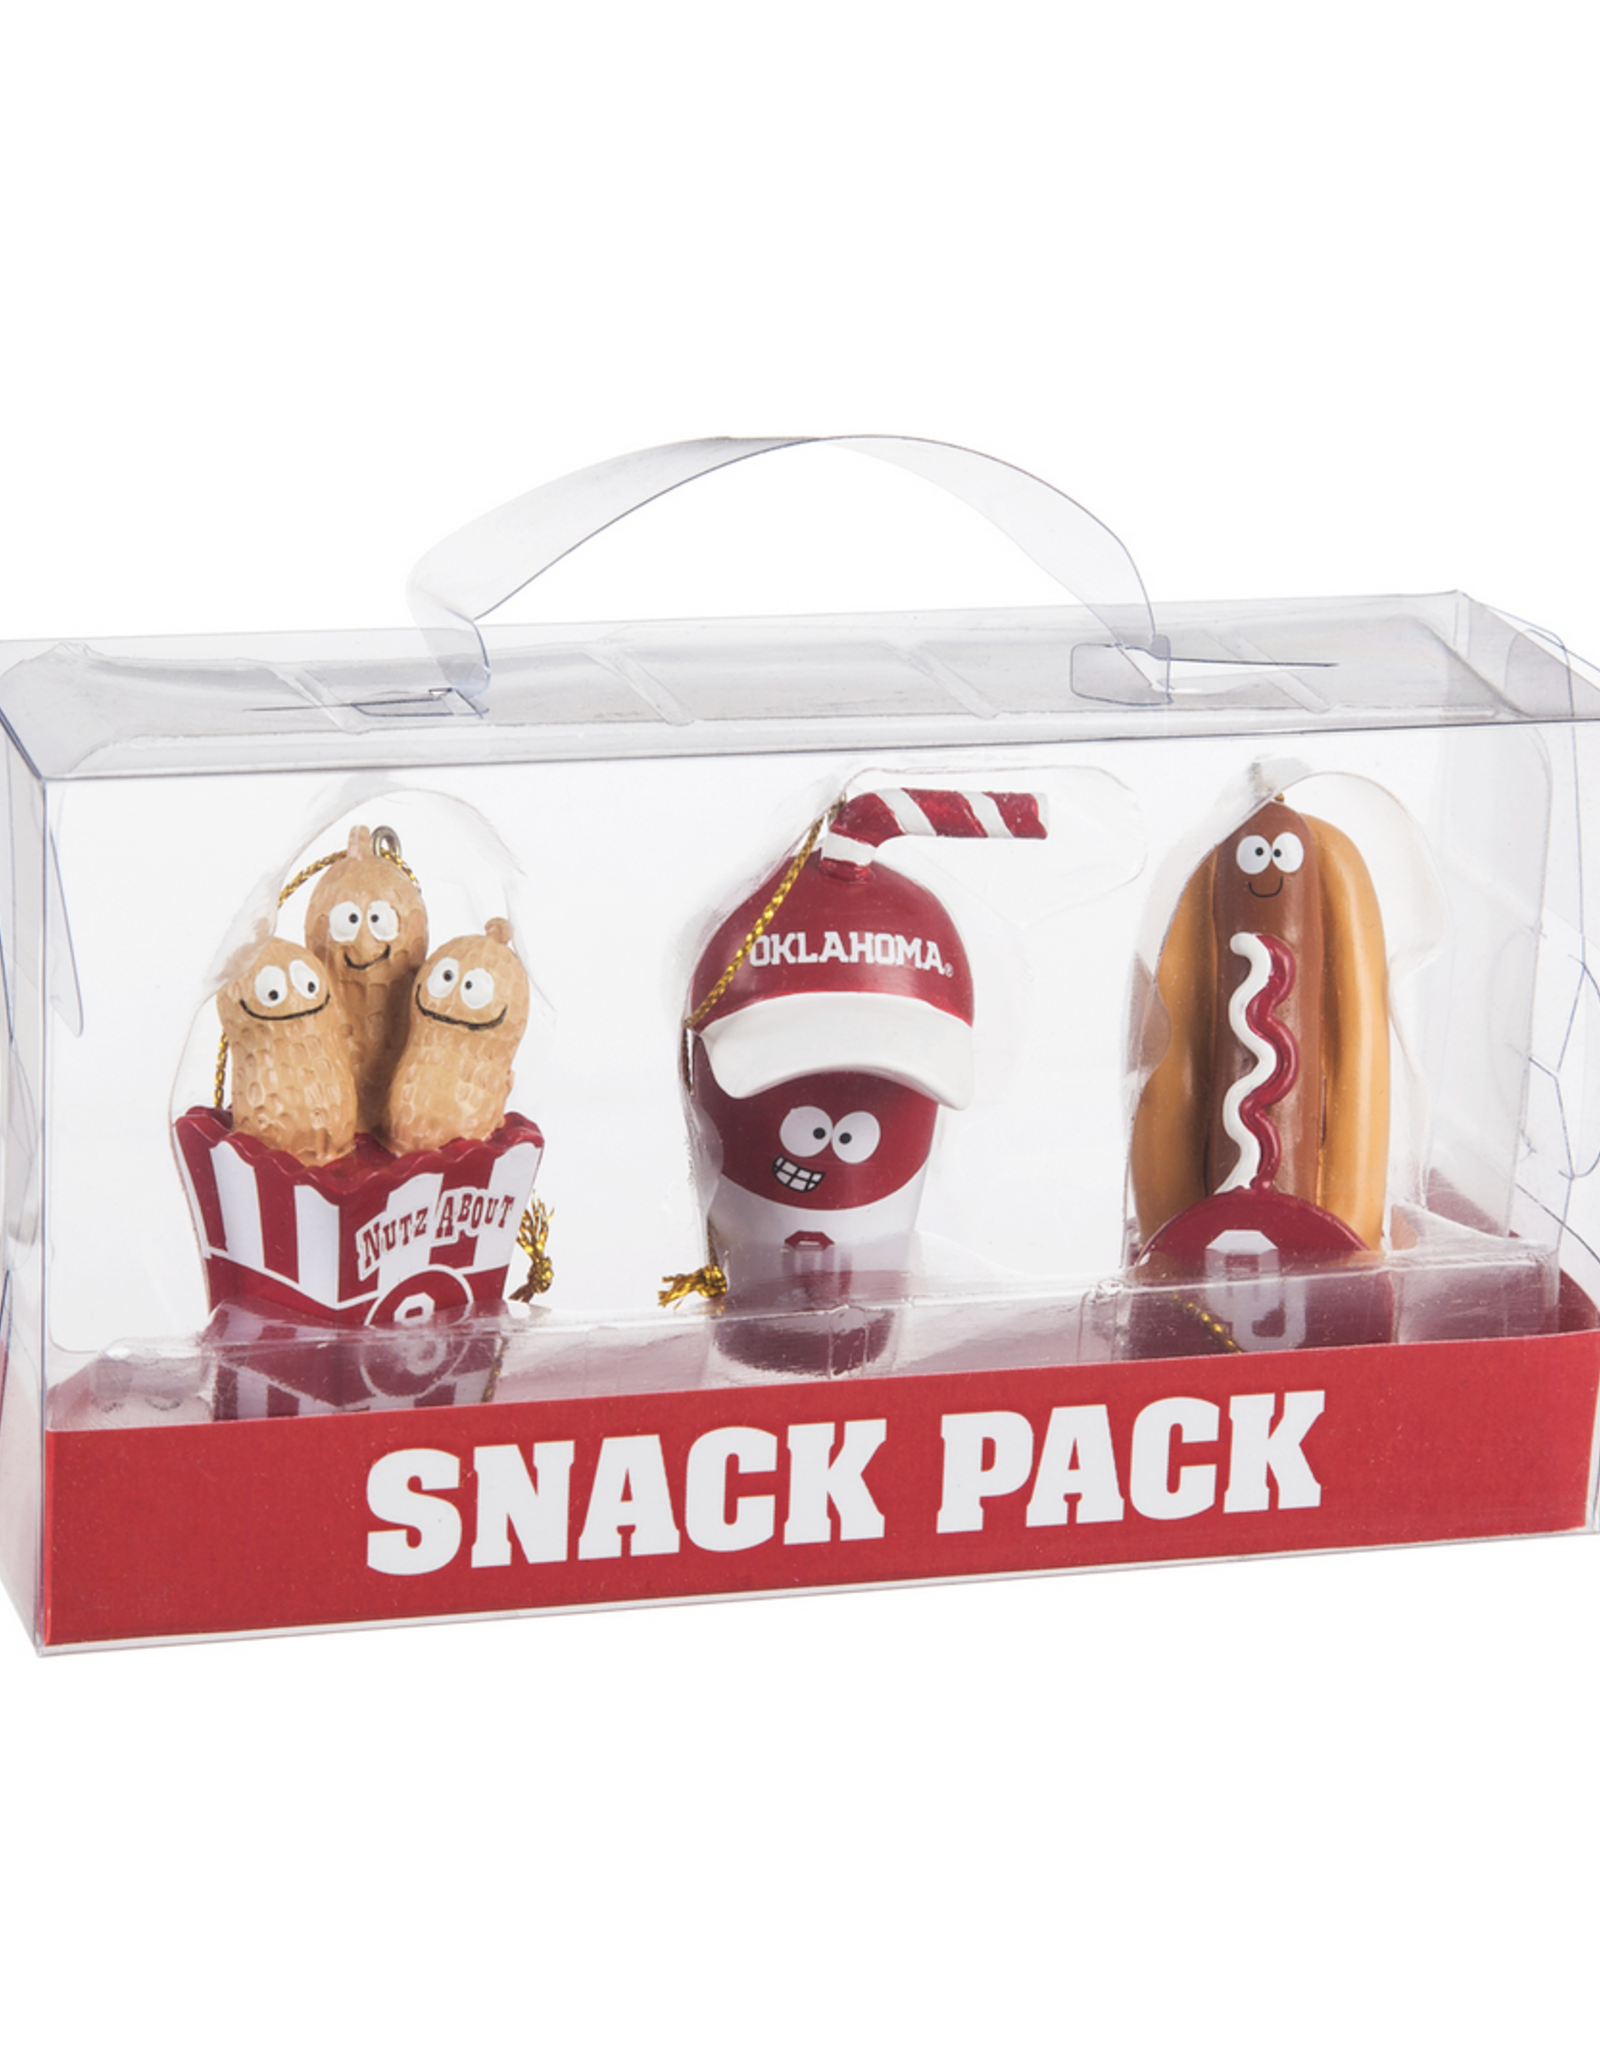 Evergreen OU Snack Pack 3pc Ornament Set